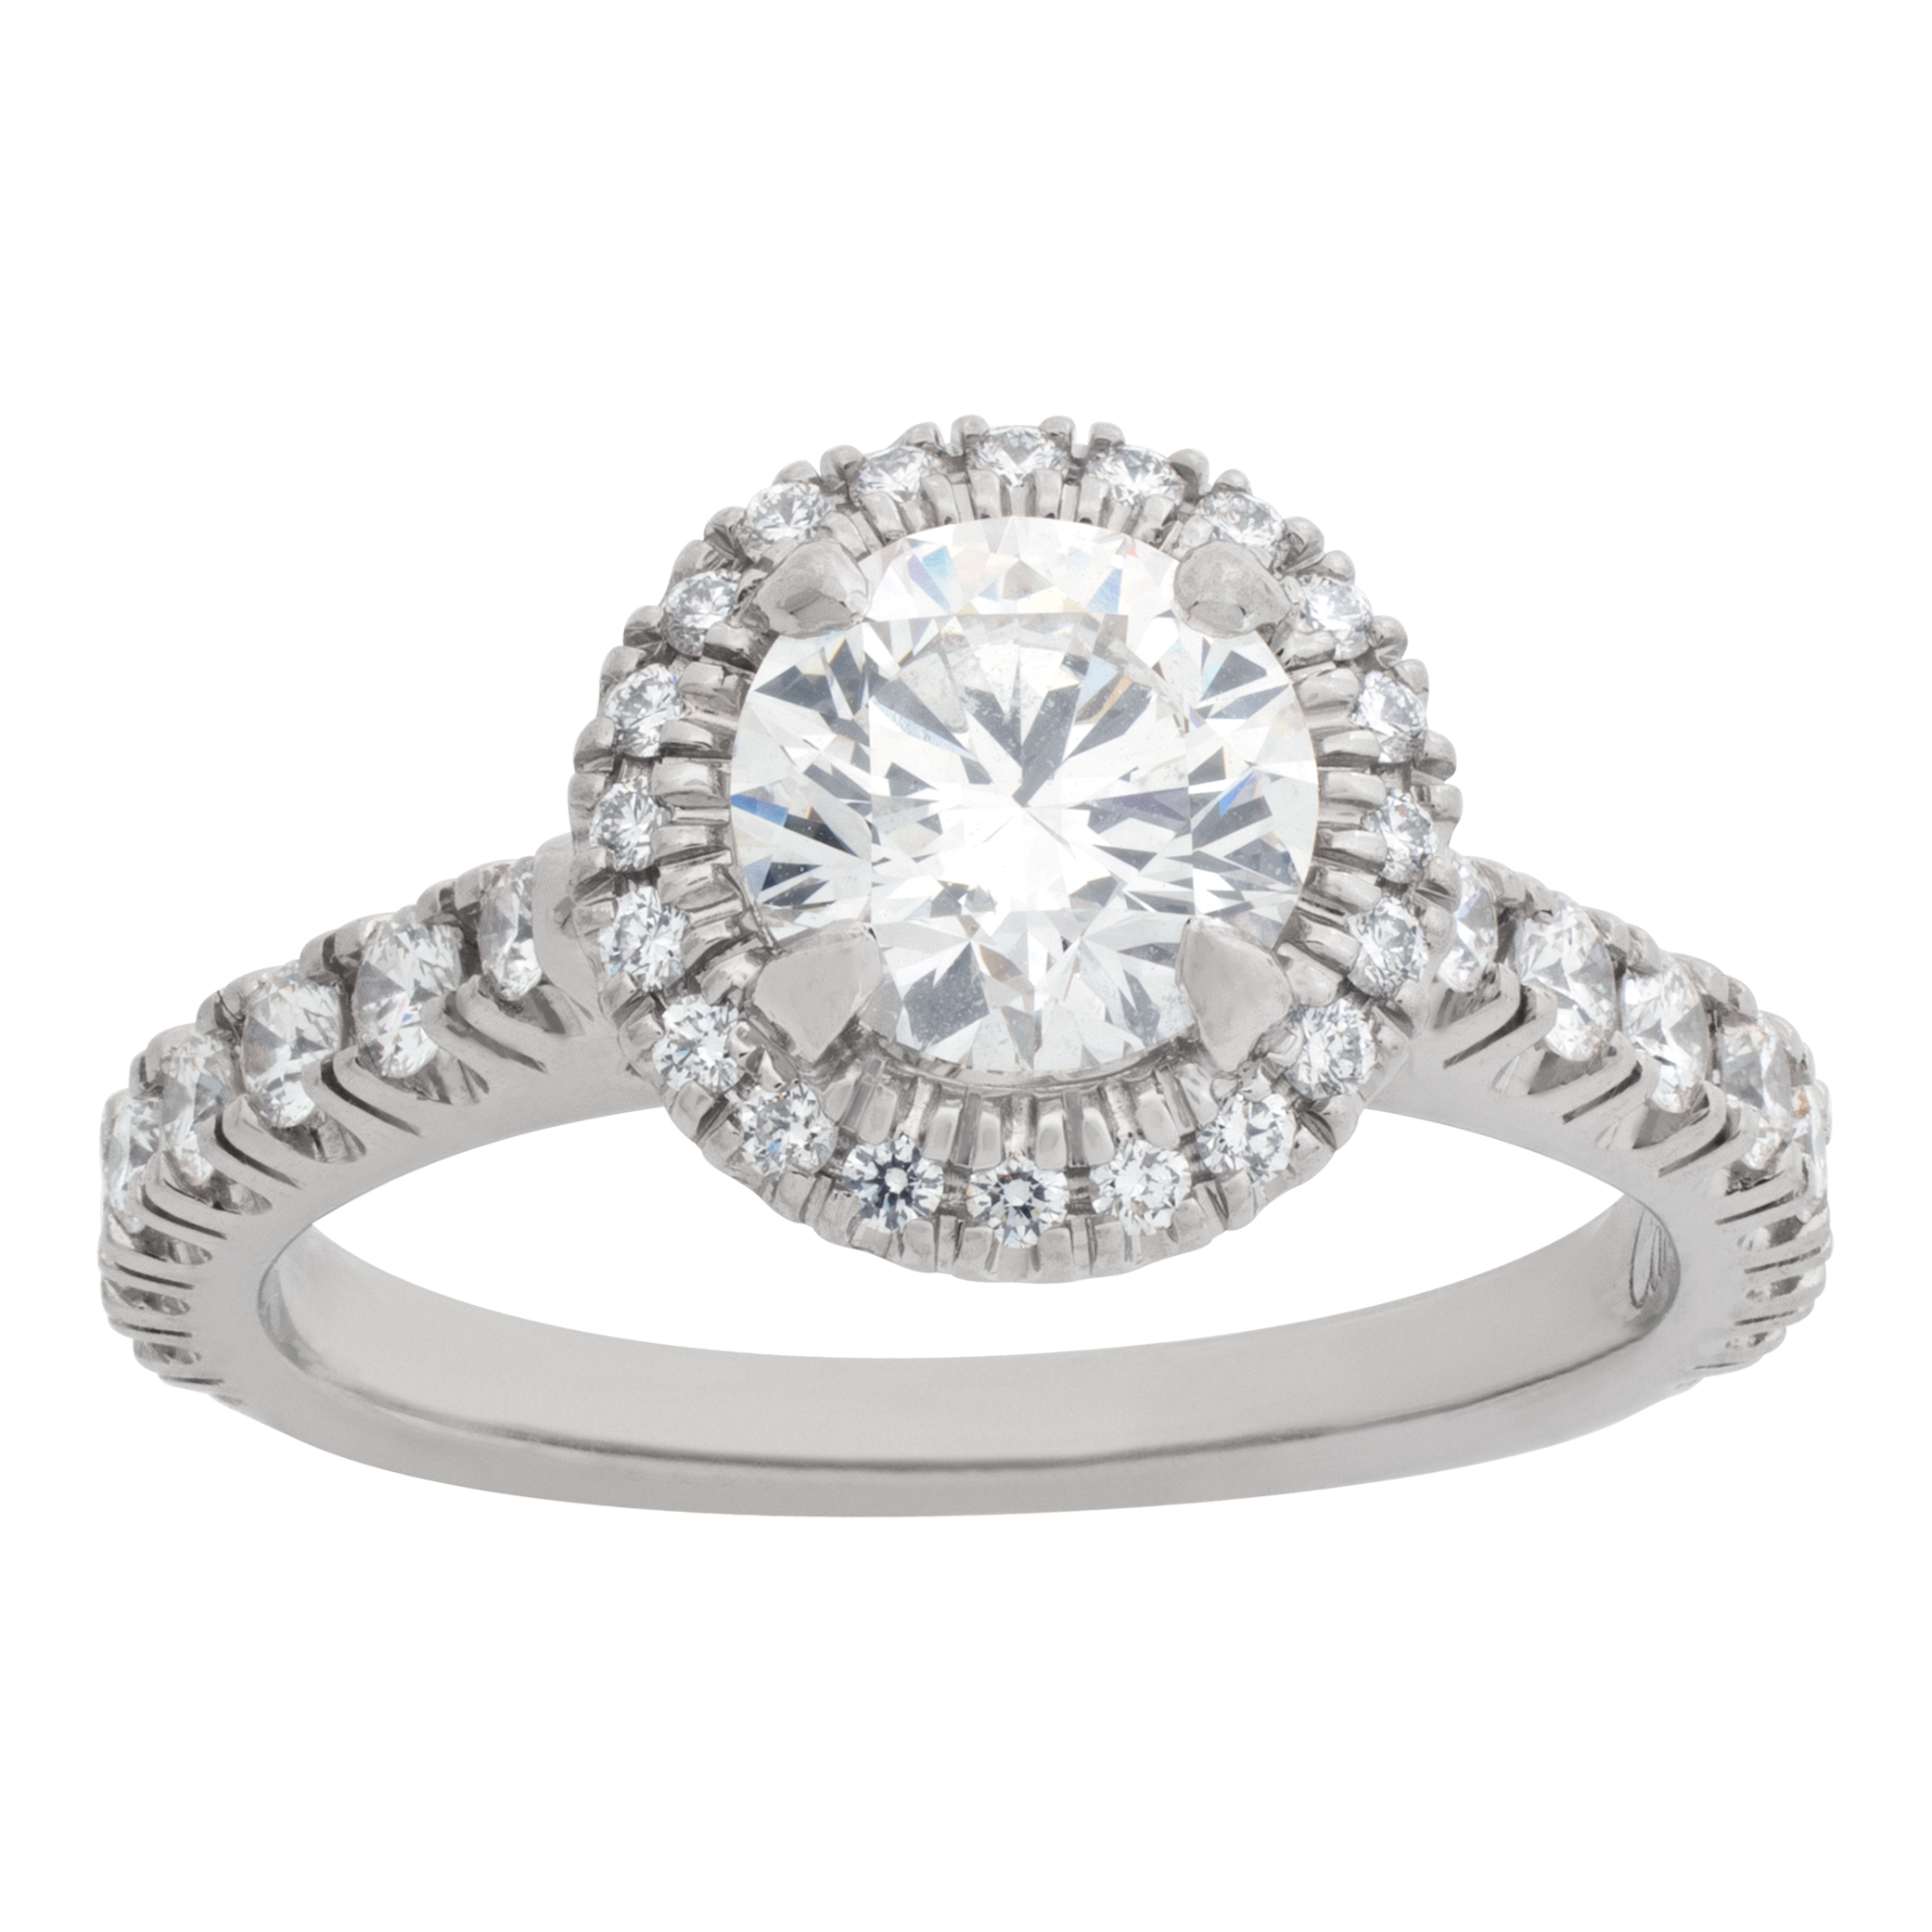 Cartier "Destinee" collection, GIA certified 0.73 carat full ct round brilliant diamond set in a halo platinum setting. image 1